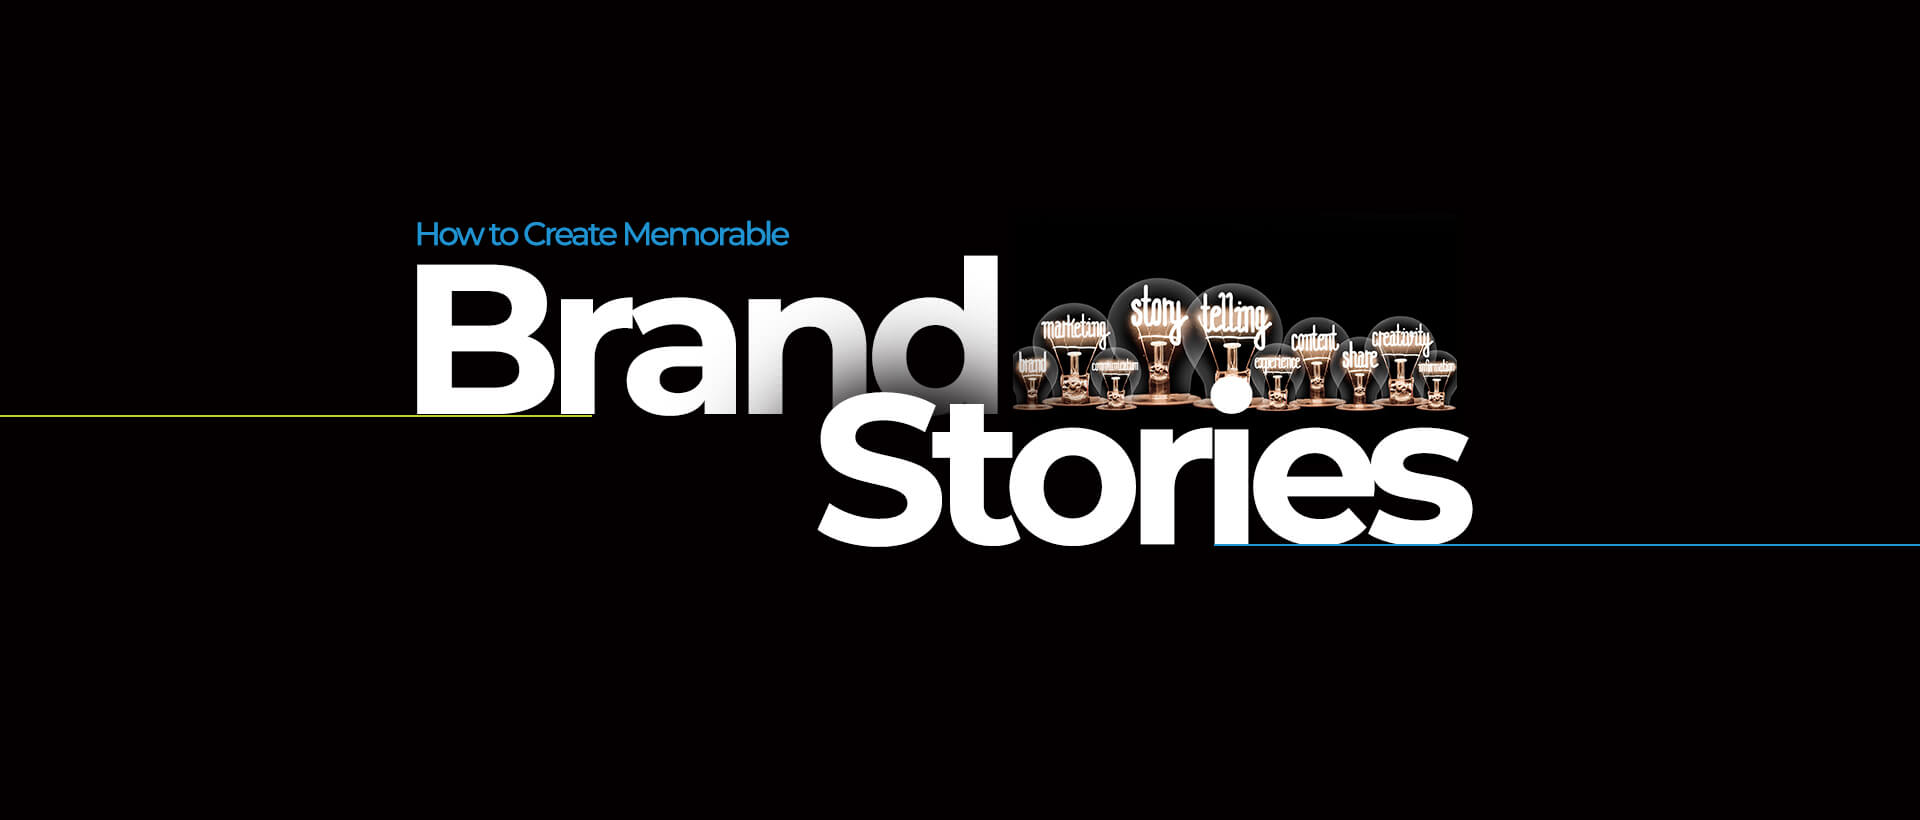 5 Tips to Create Memorable Brand Stories